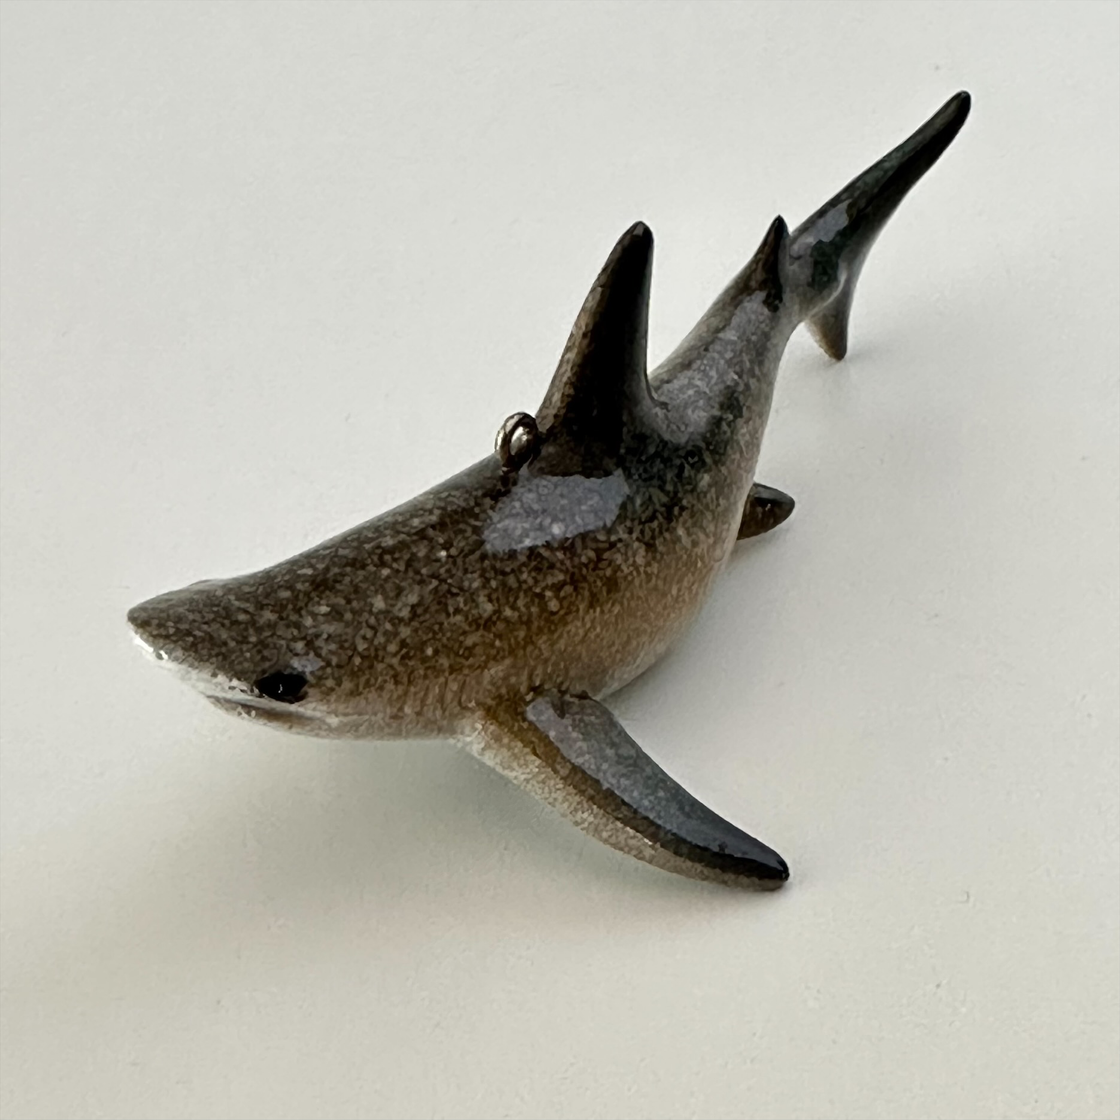 The rengöra shark ornament is a miniature replica of a real shark, featuring a lifelike appearance with vivid, shark-like coloring and a pair of striking eyes. It also includes a hook for easy hanging on your Christmas tree.